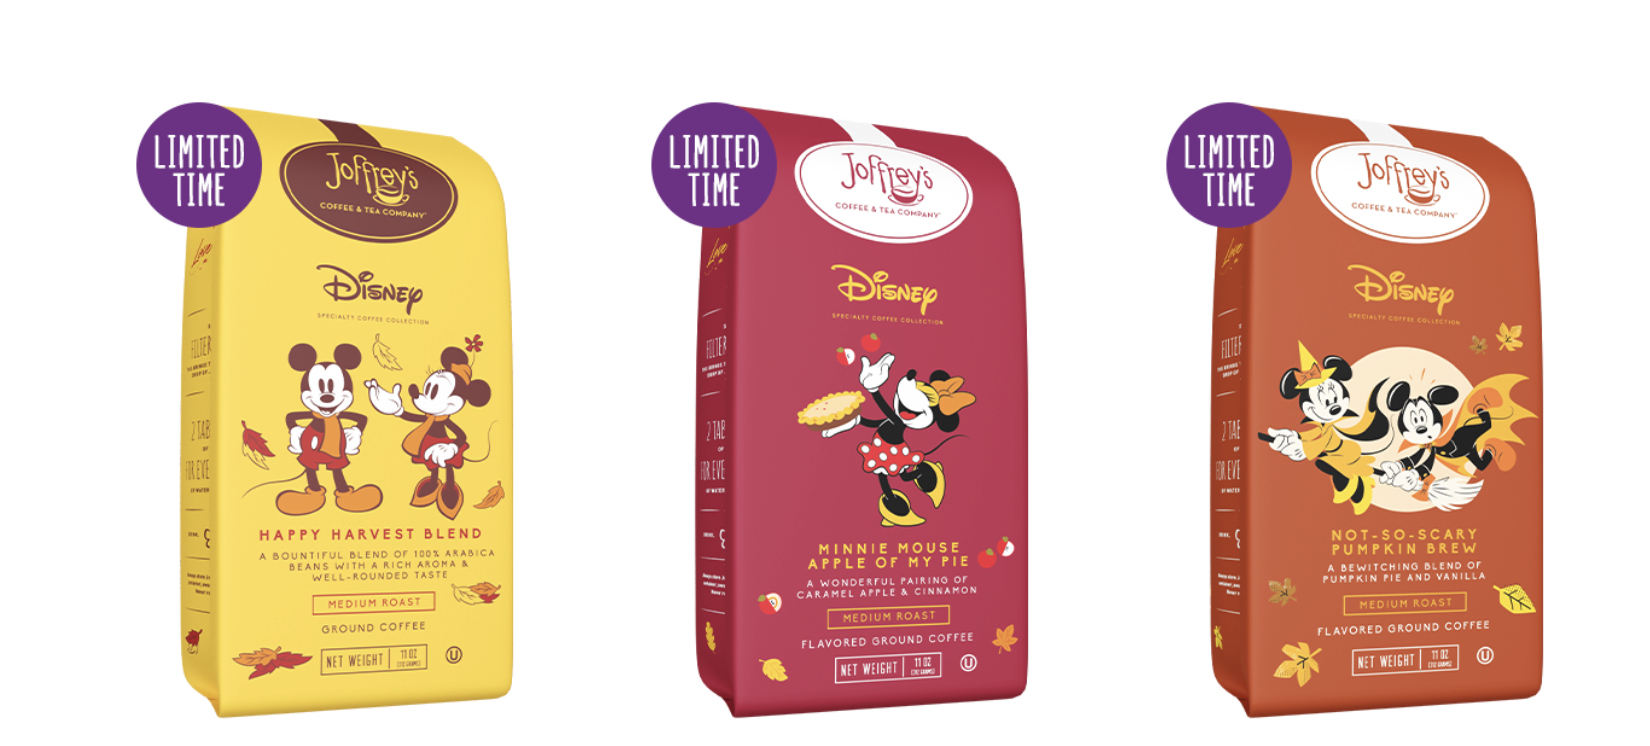 Joffrey's Introduces New Disney Villains Coffee Collection